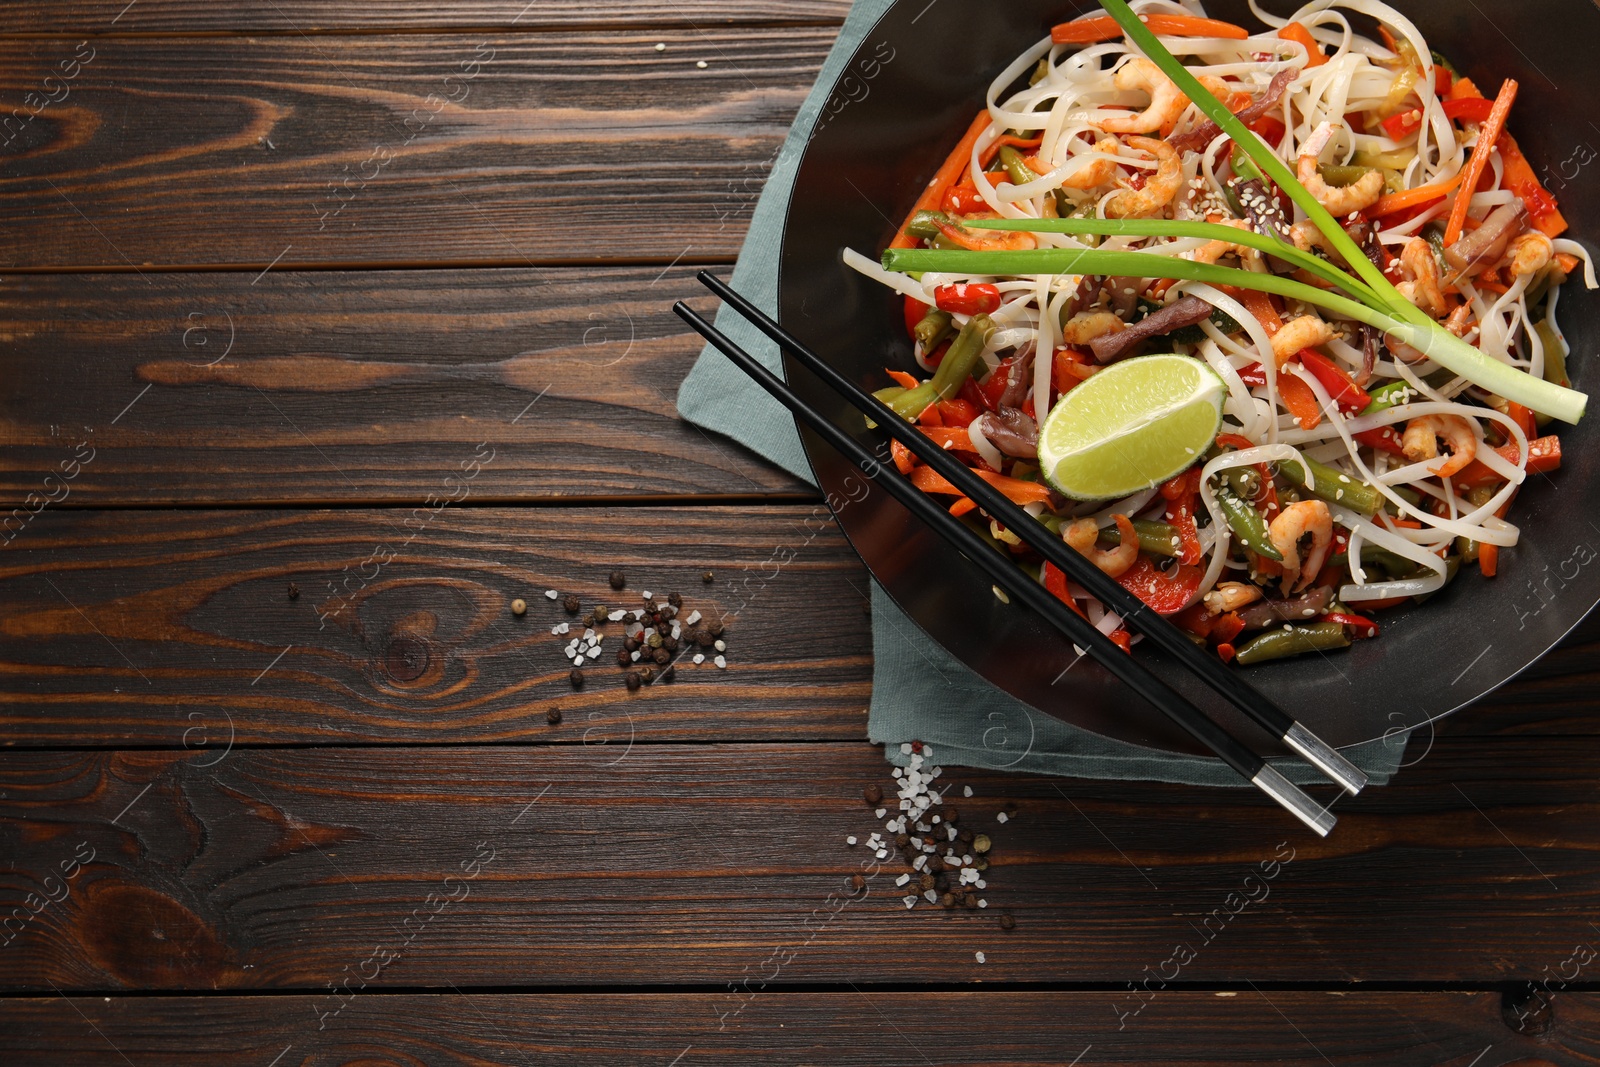 Photo of Shrimp stir fry with noodles and vegetables in wok on wooden table, top view. Space for text